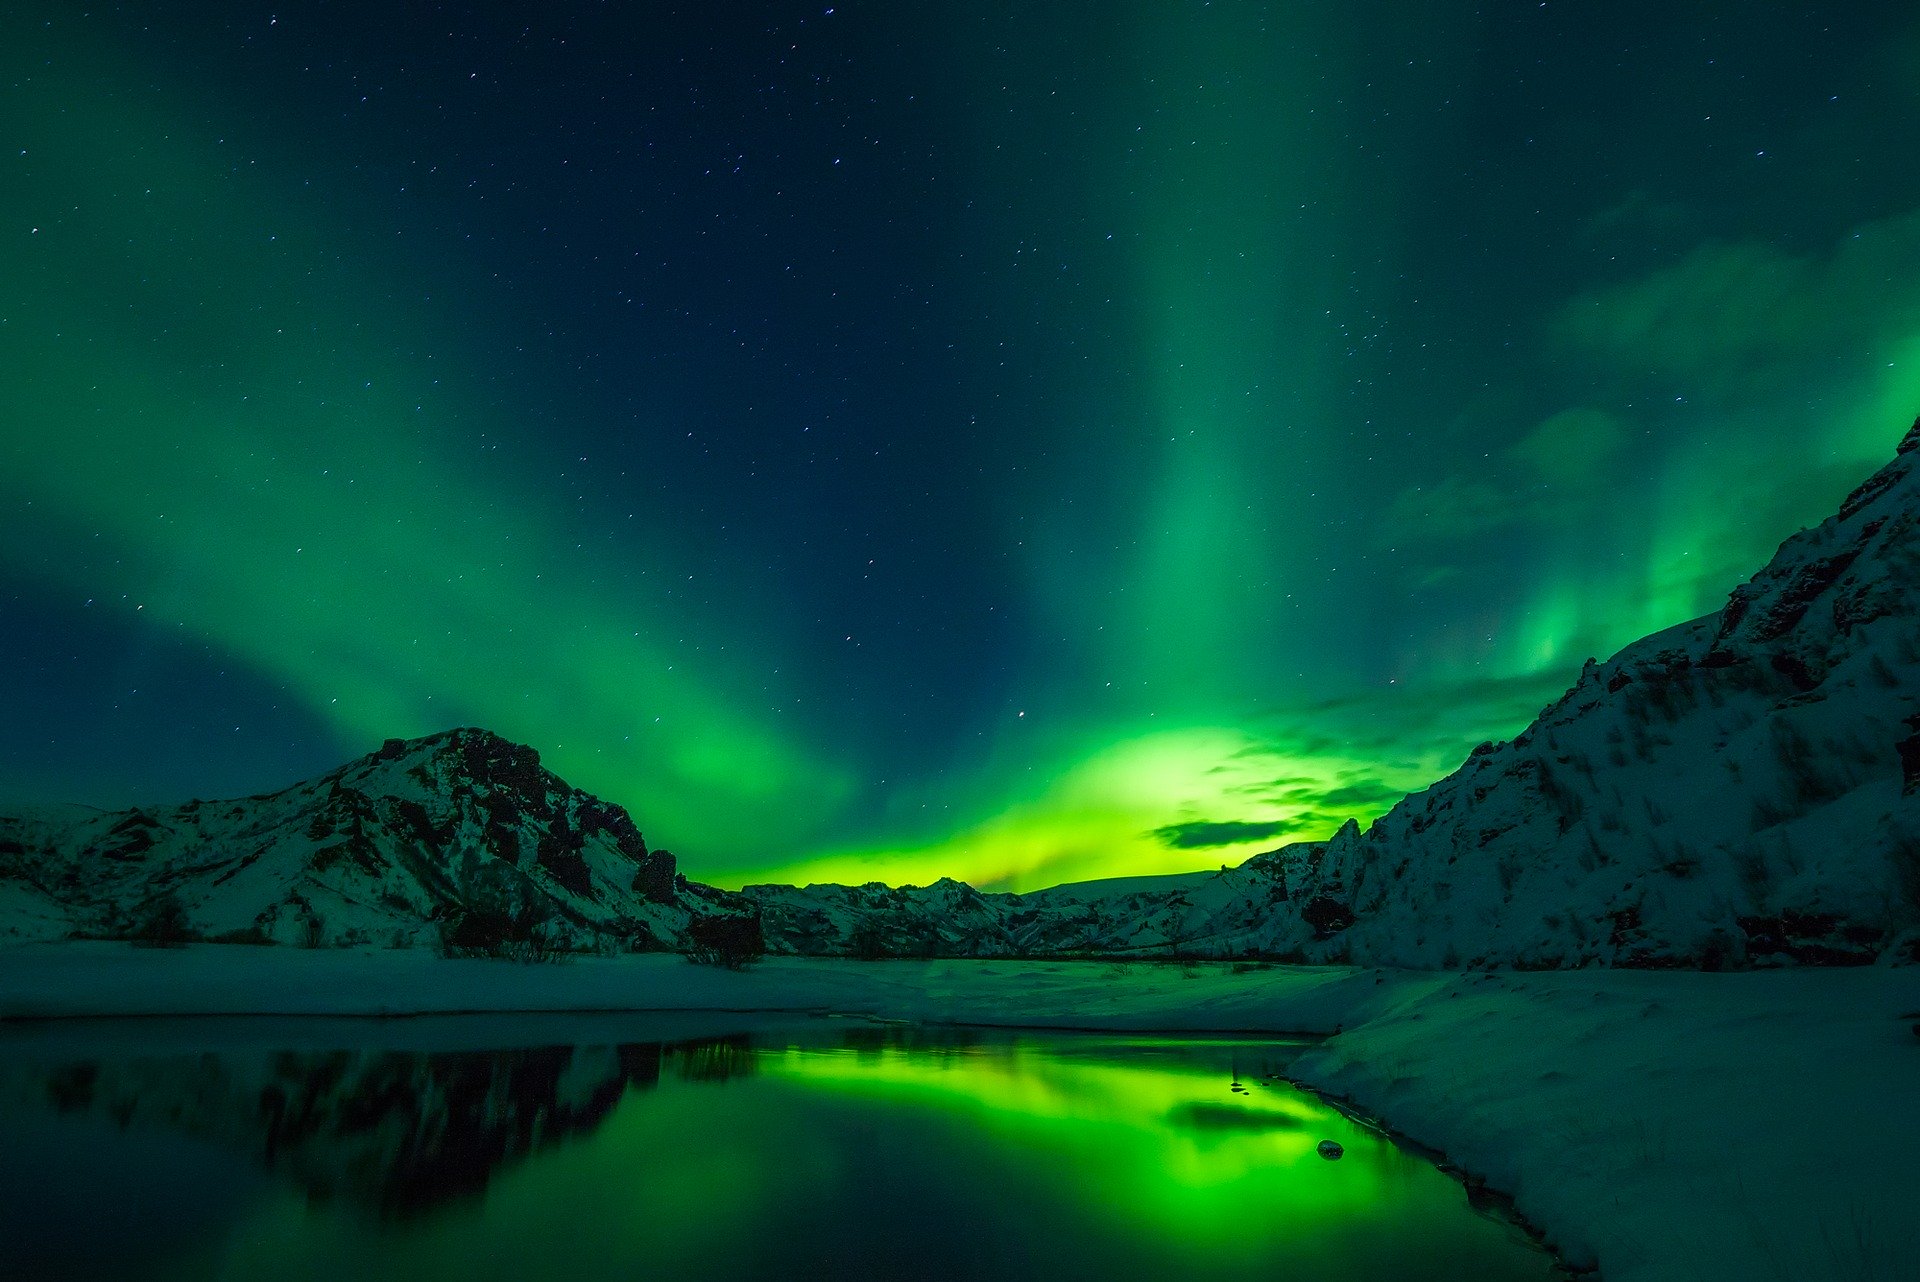 Green northern lights in iceland at night, lake one the foreground, mountains on the background